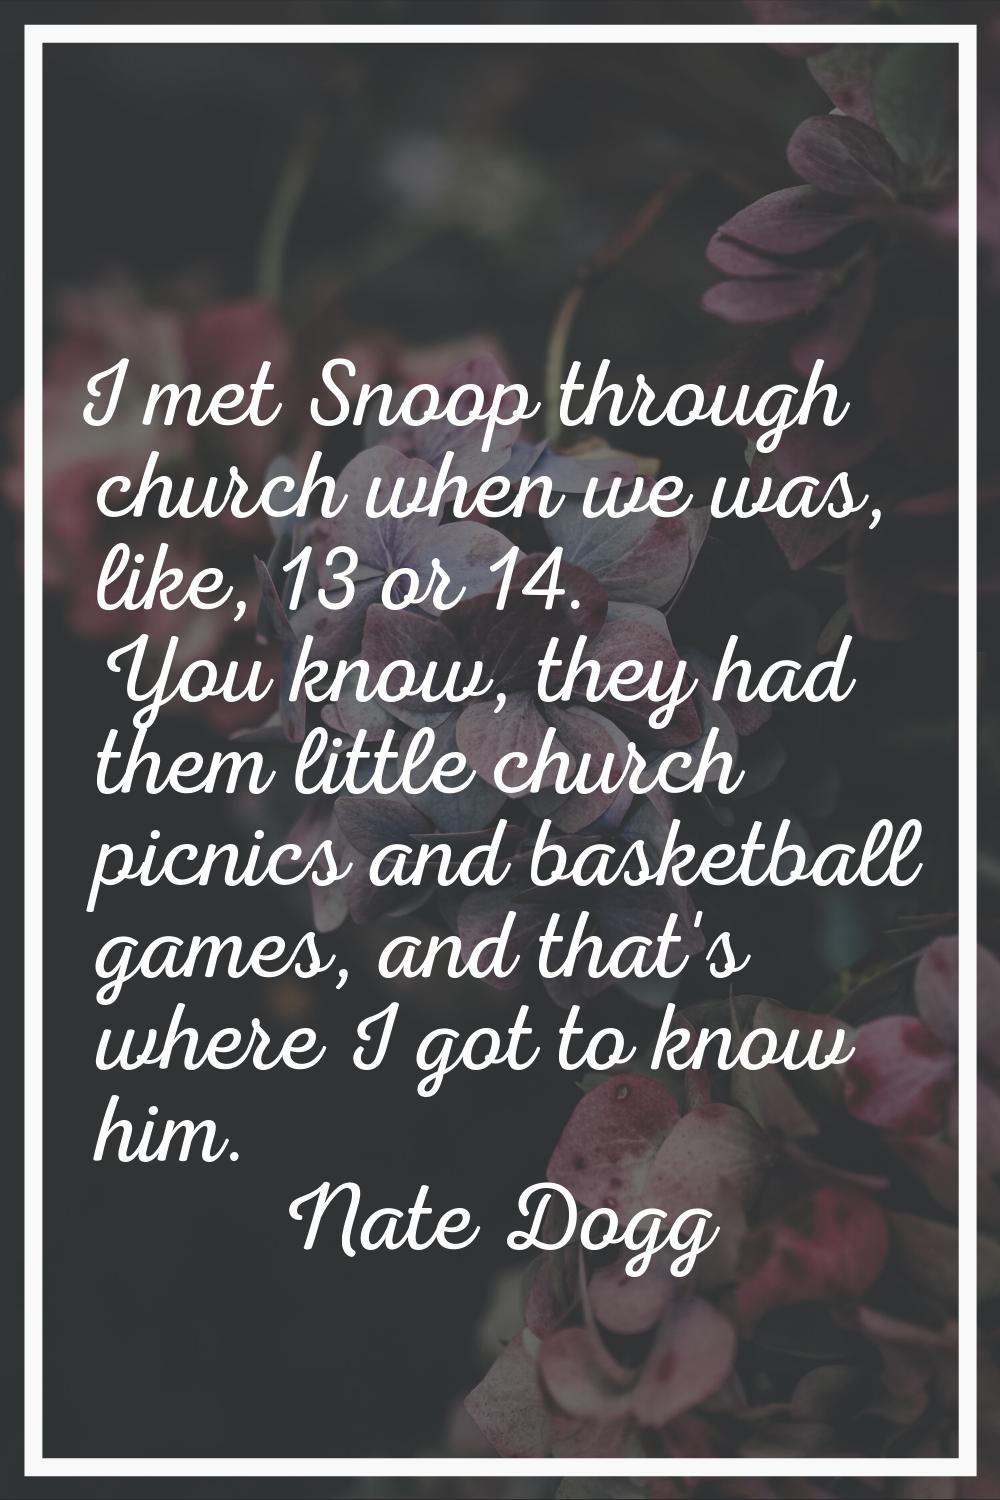 I met Snoop through church when we was, like, 13 or 14. You know, they had them little church picni